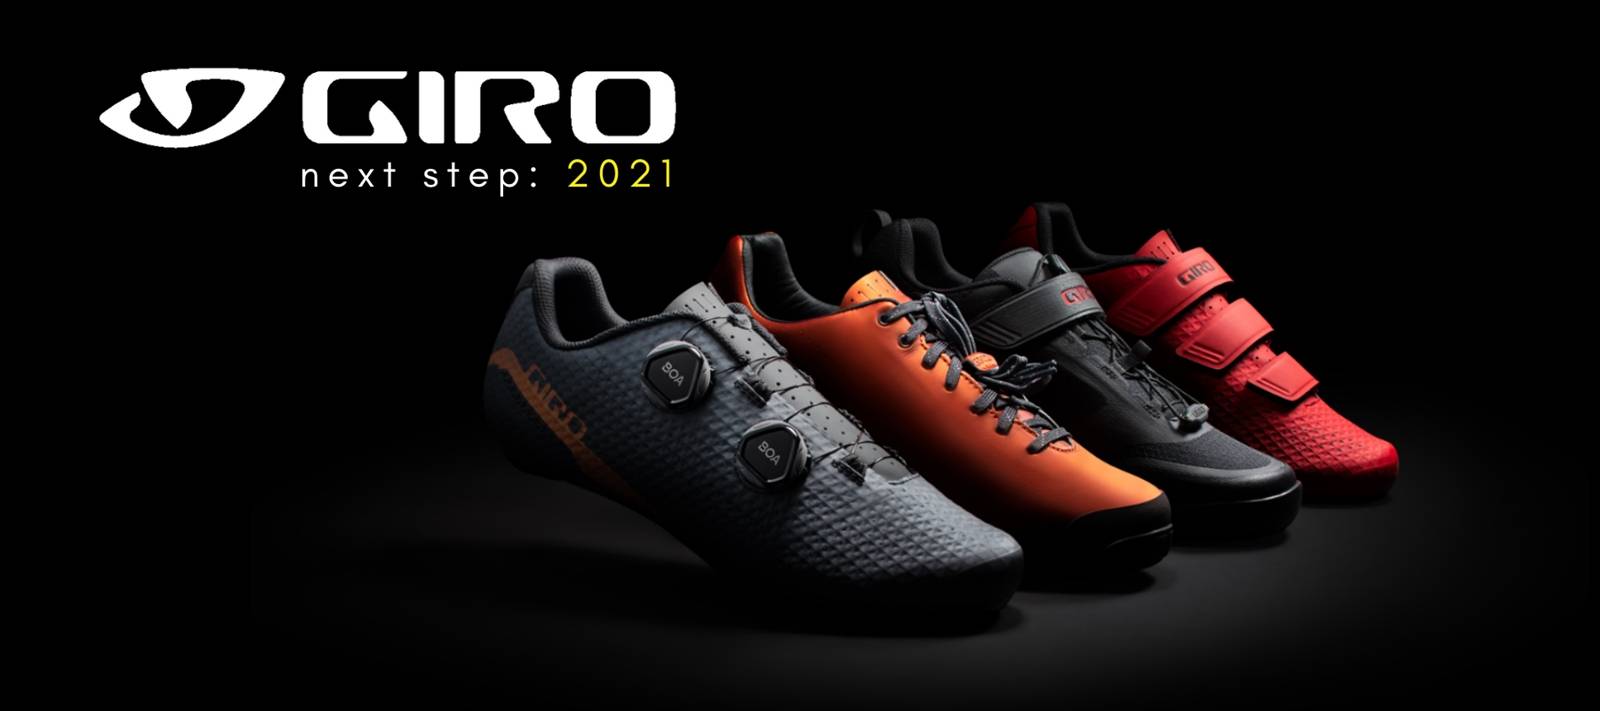 A step beyond: 2021 Giro new products